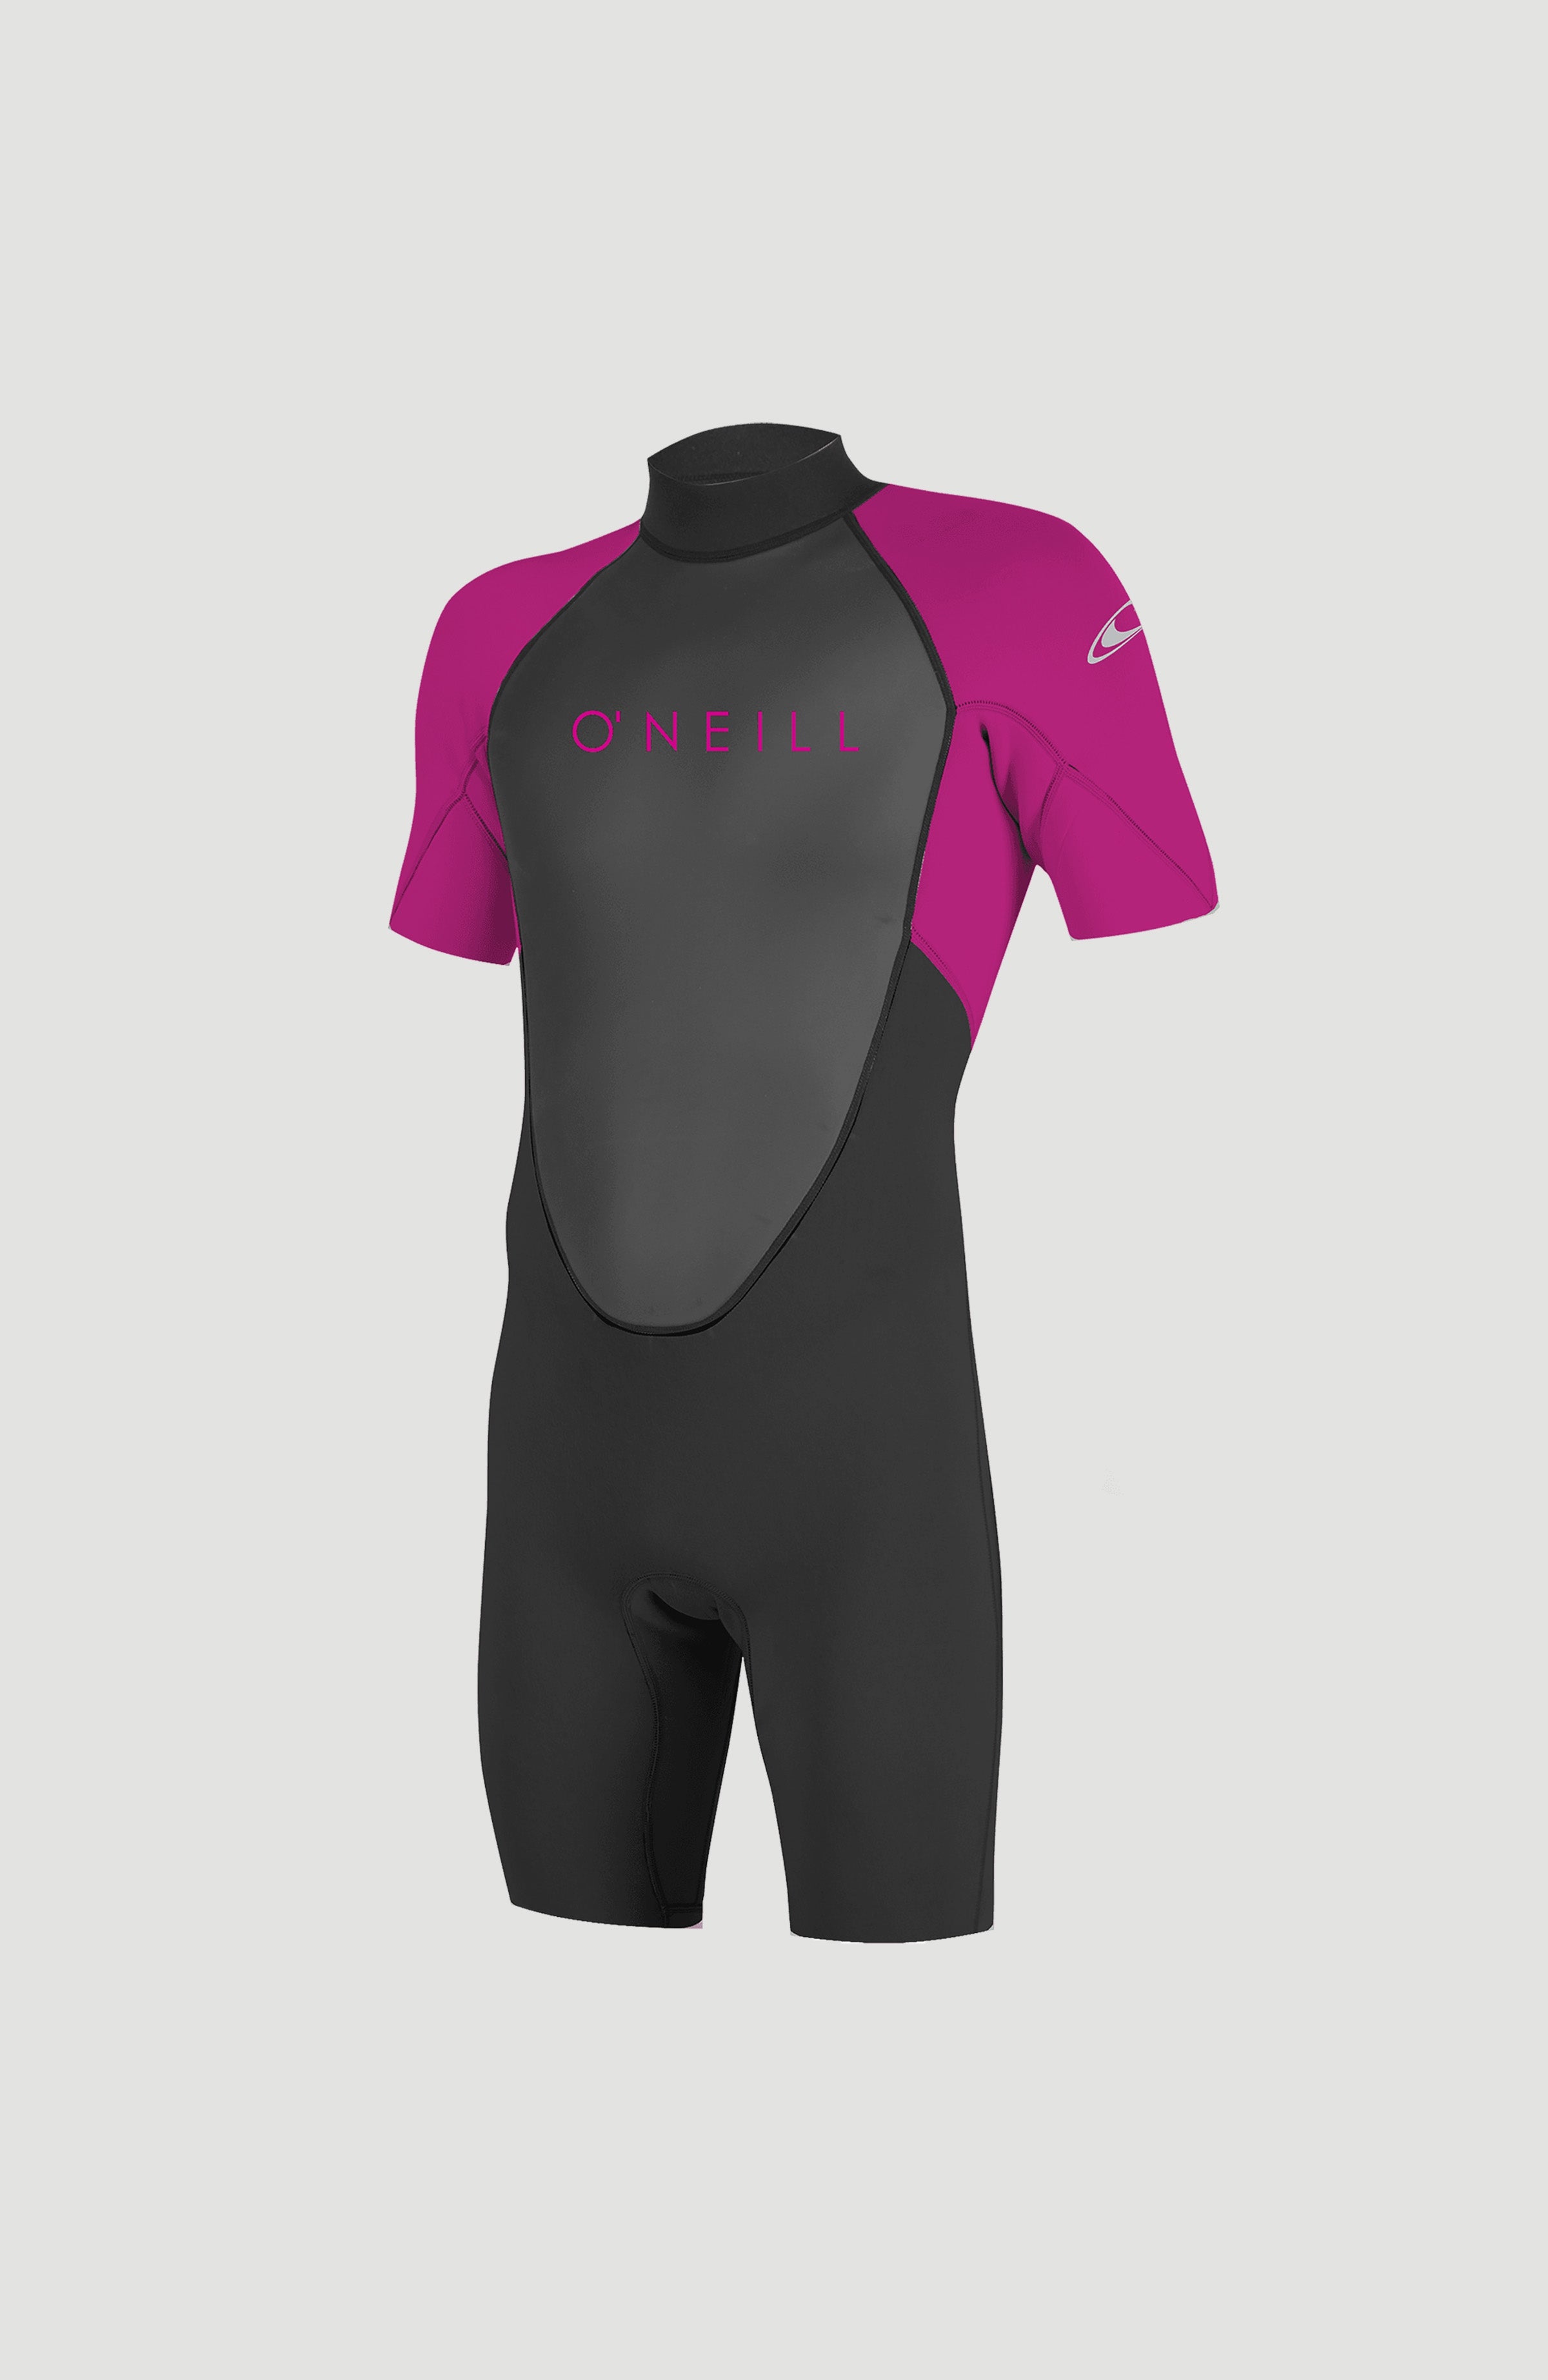 O'Neill Reactor-2 2mm Back Zip Shortsleeve Spring Wetsuit Youth 